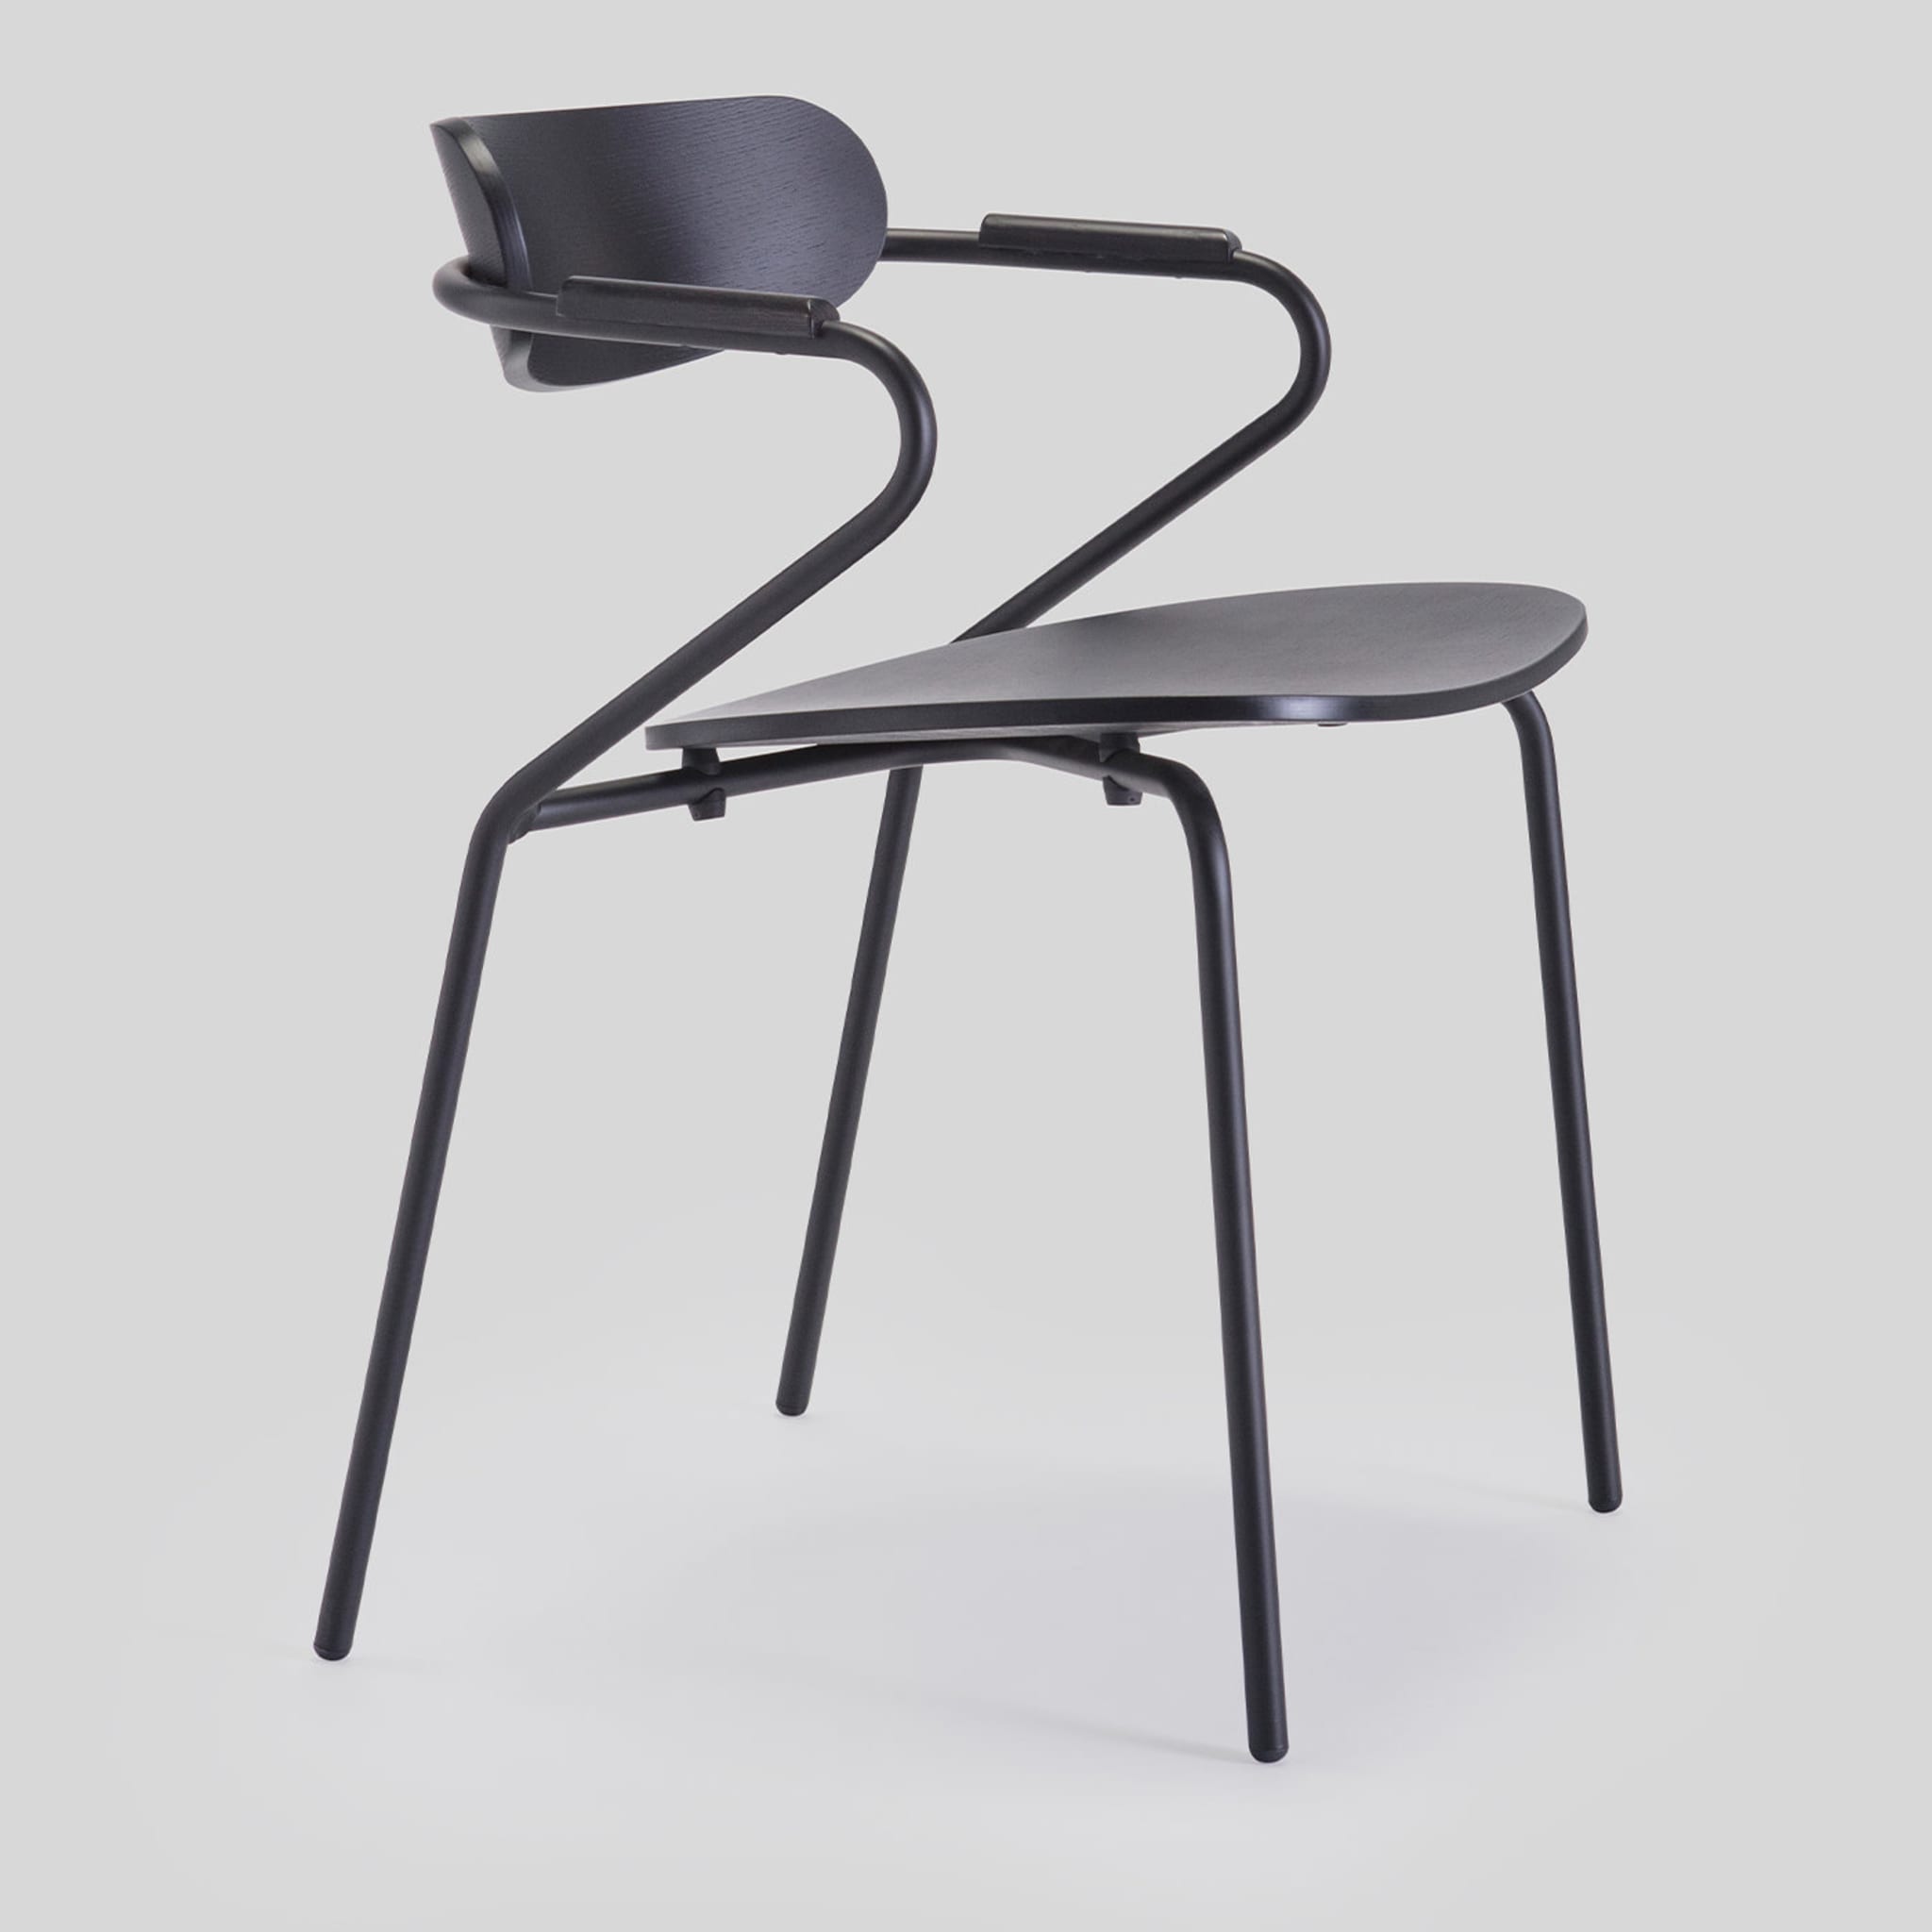 Linea Black Chair with Armrests - Alternative view 3